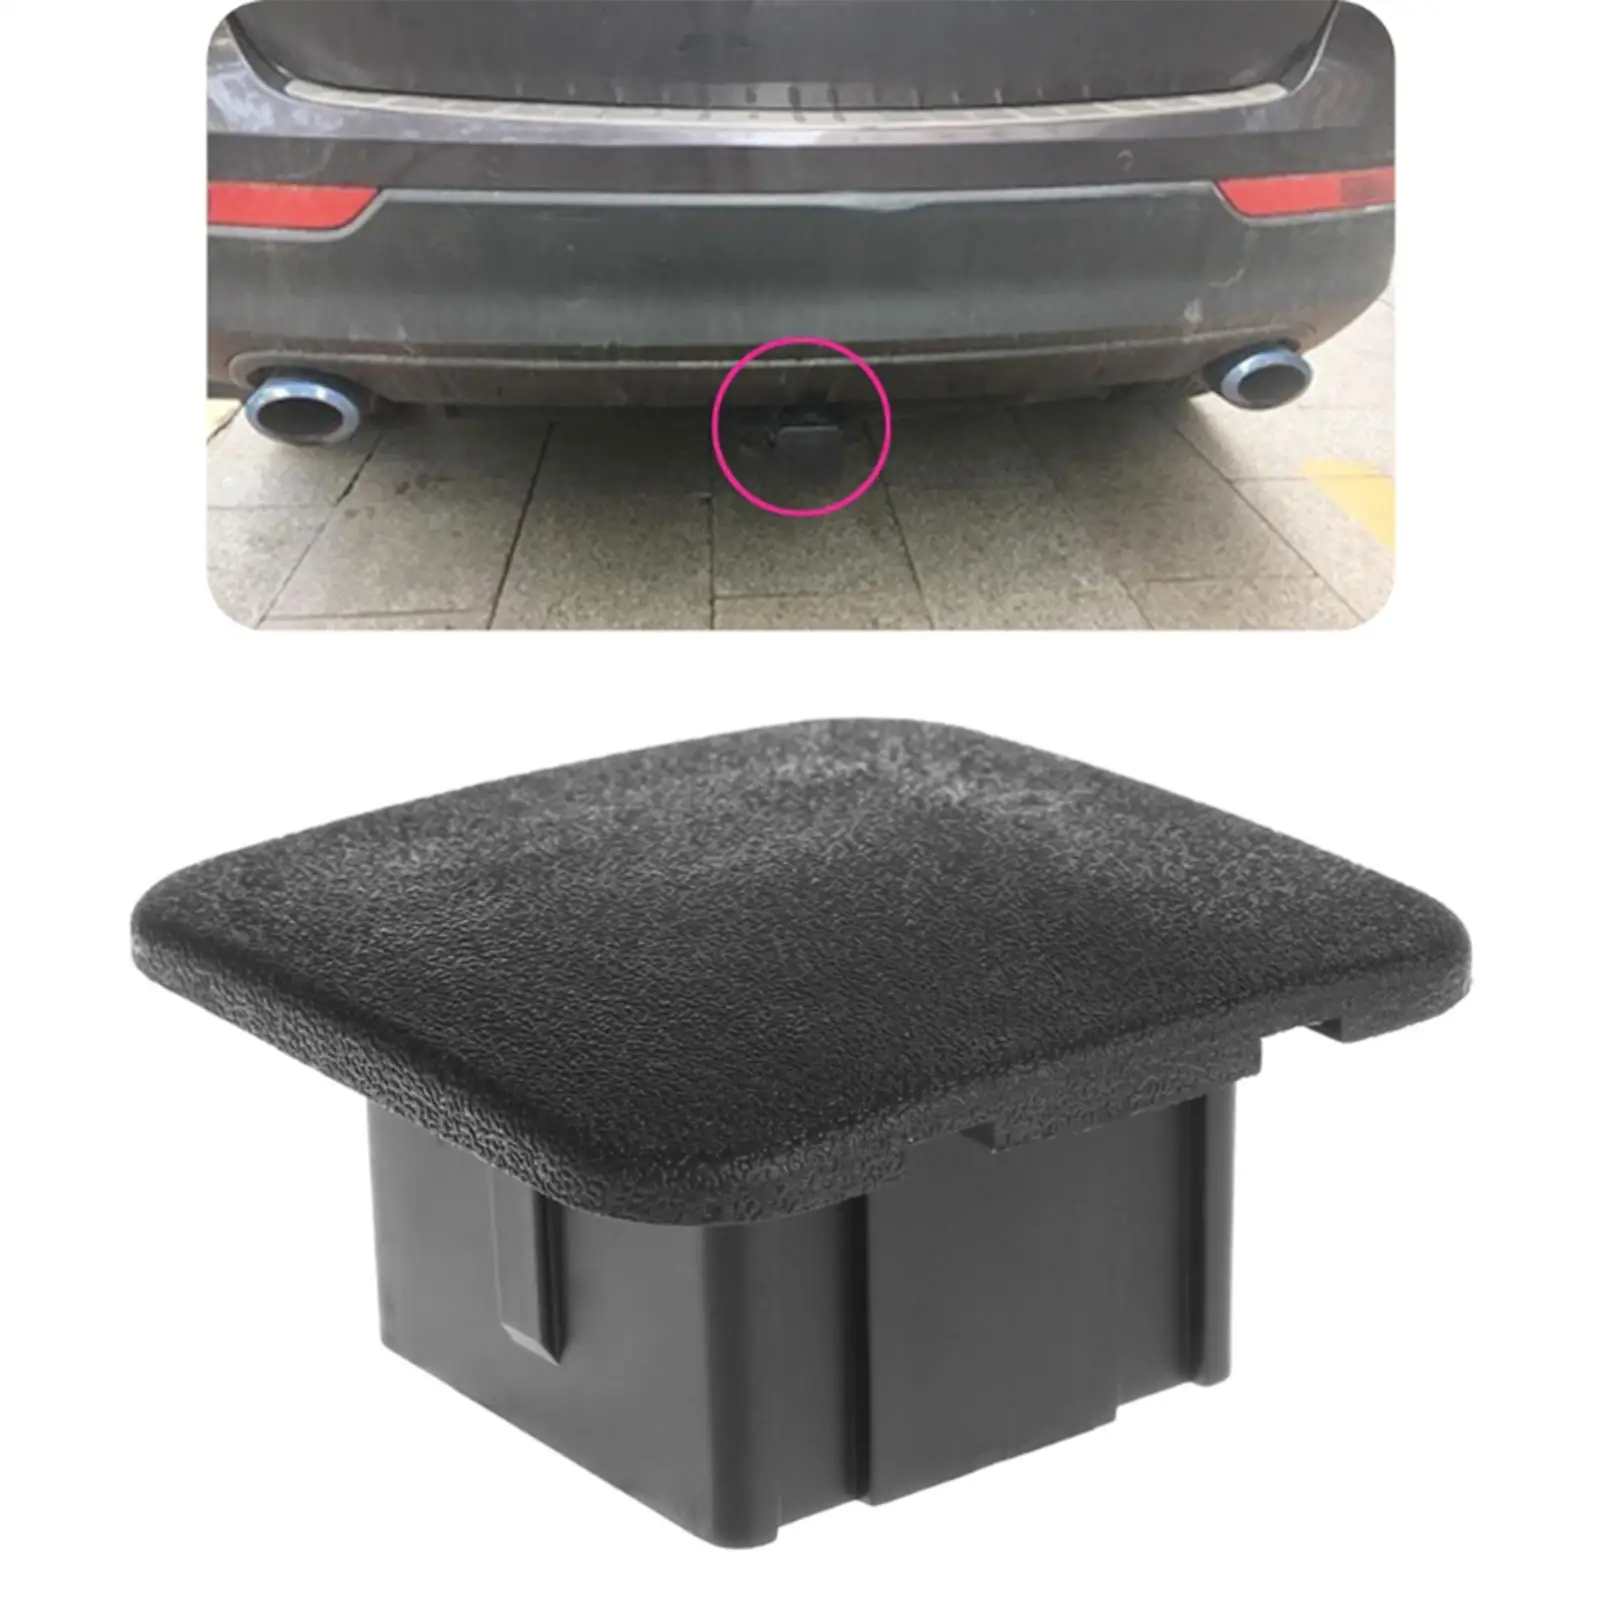 2 Inches Rubber Trailer Hitch Cover for Most Models Hitch Receivers Durable